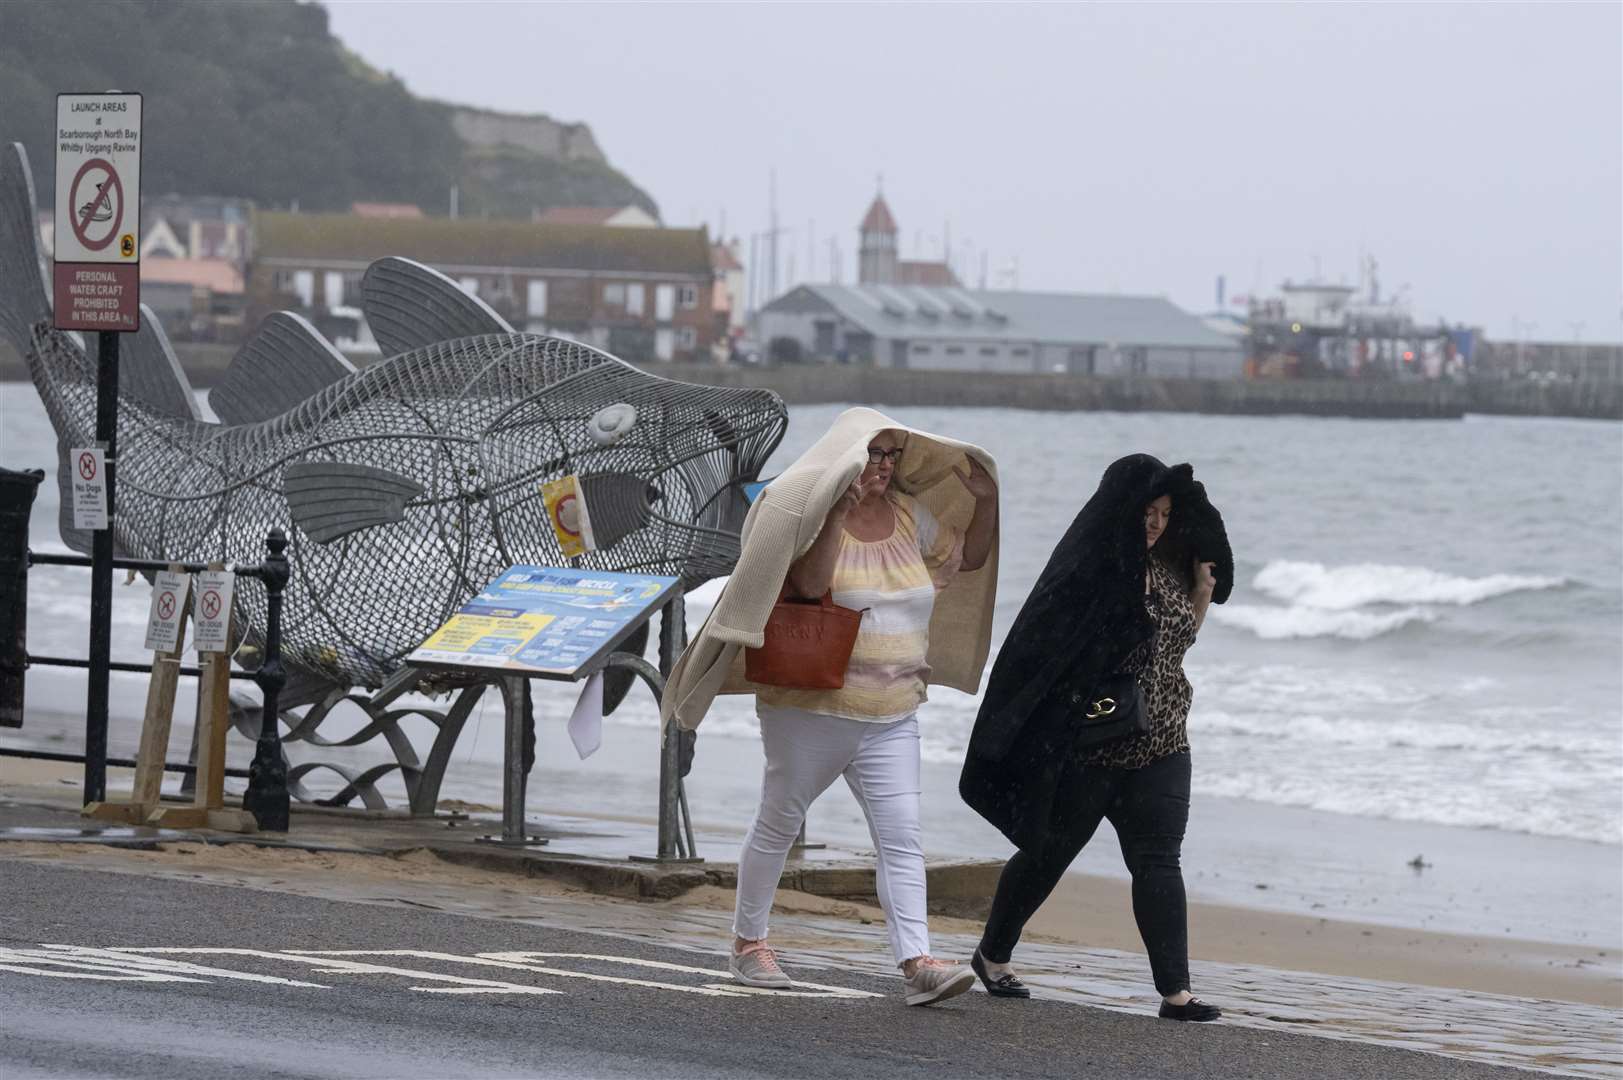 People walk along the seafront in Scarborough, North Yorkshire (Danny Lawson/PA)